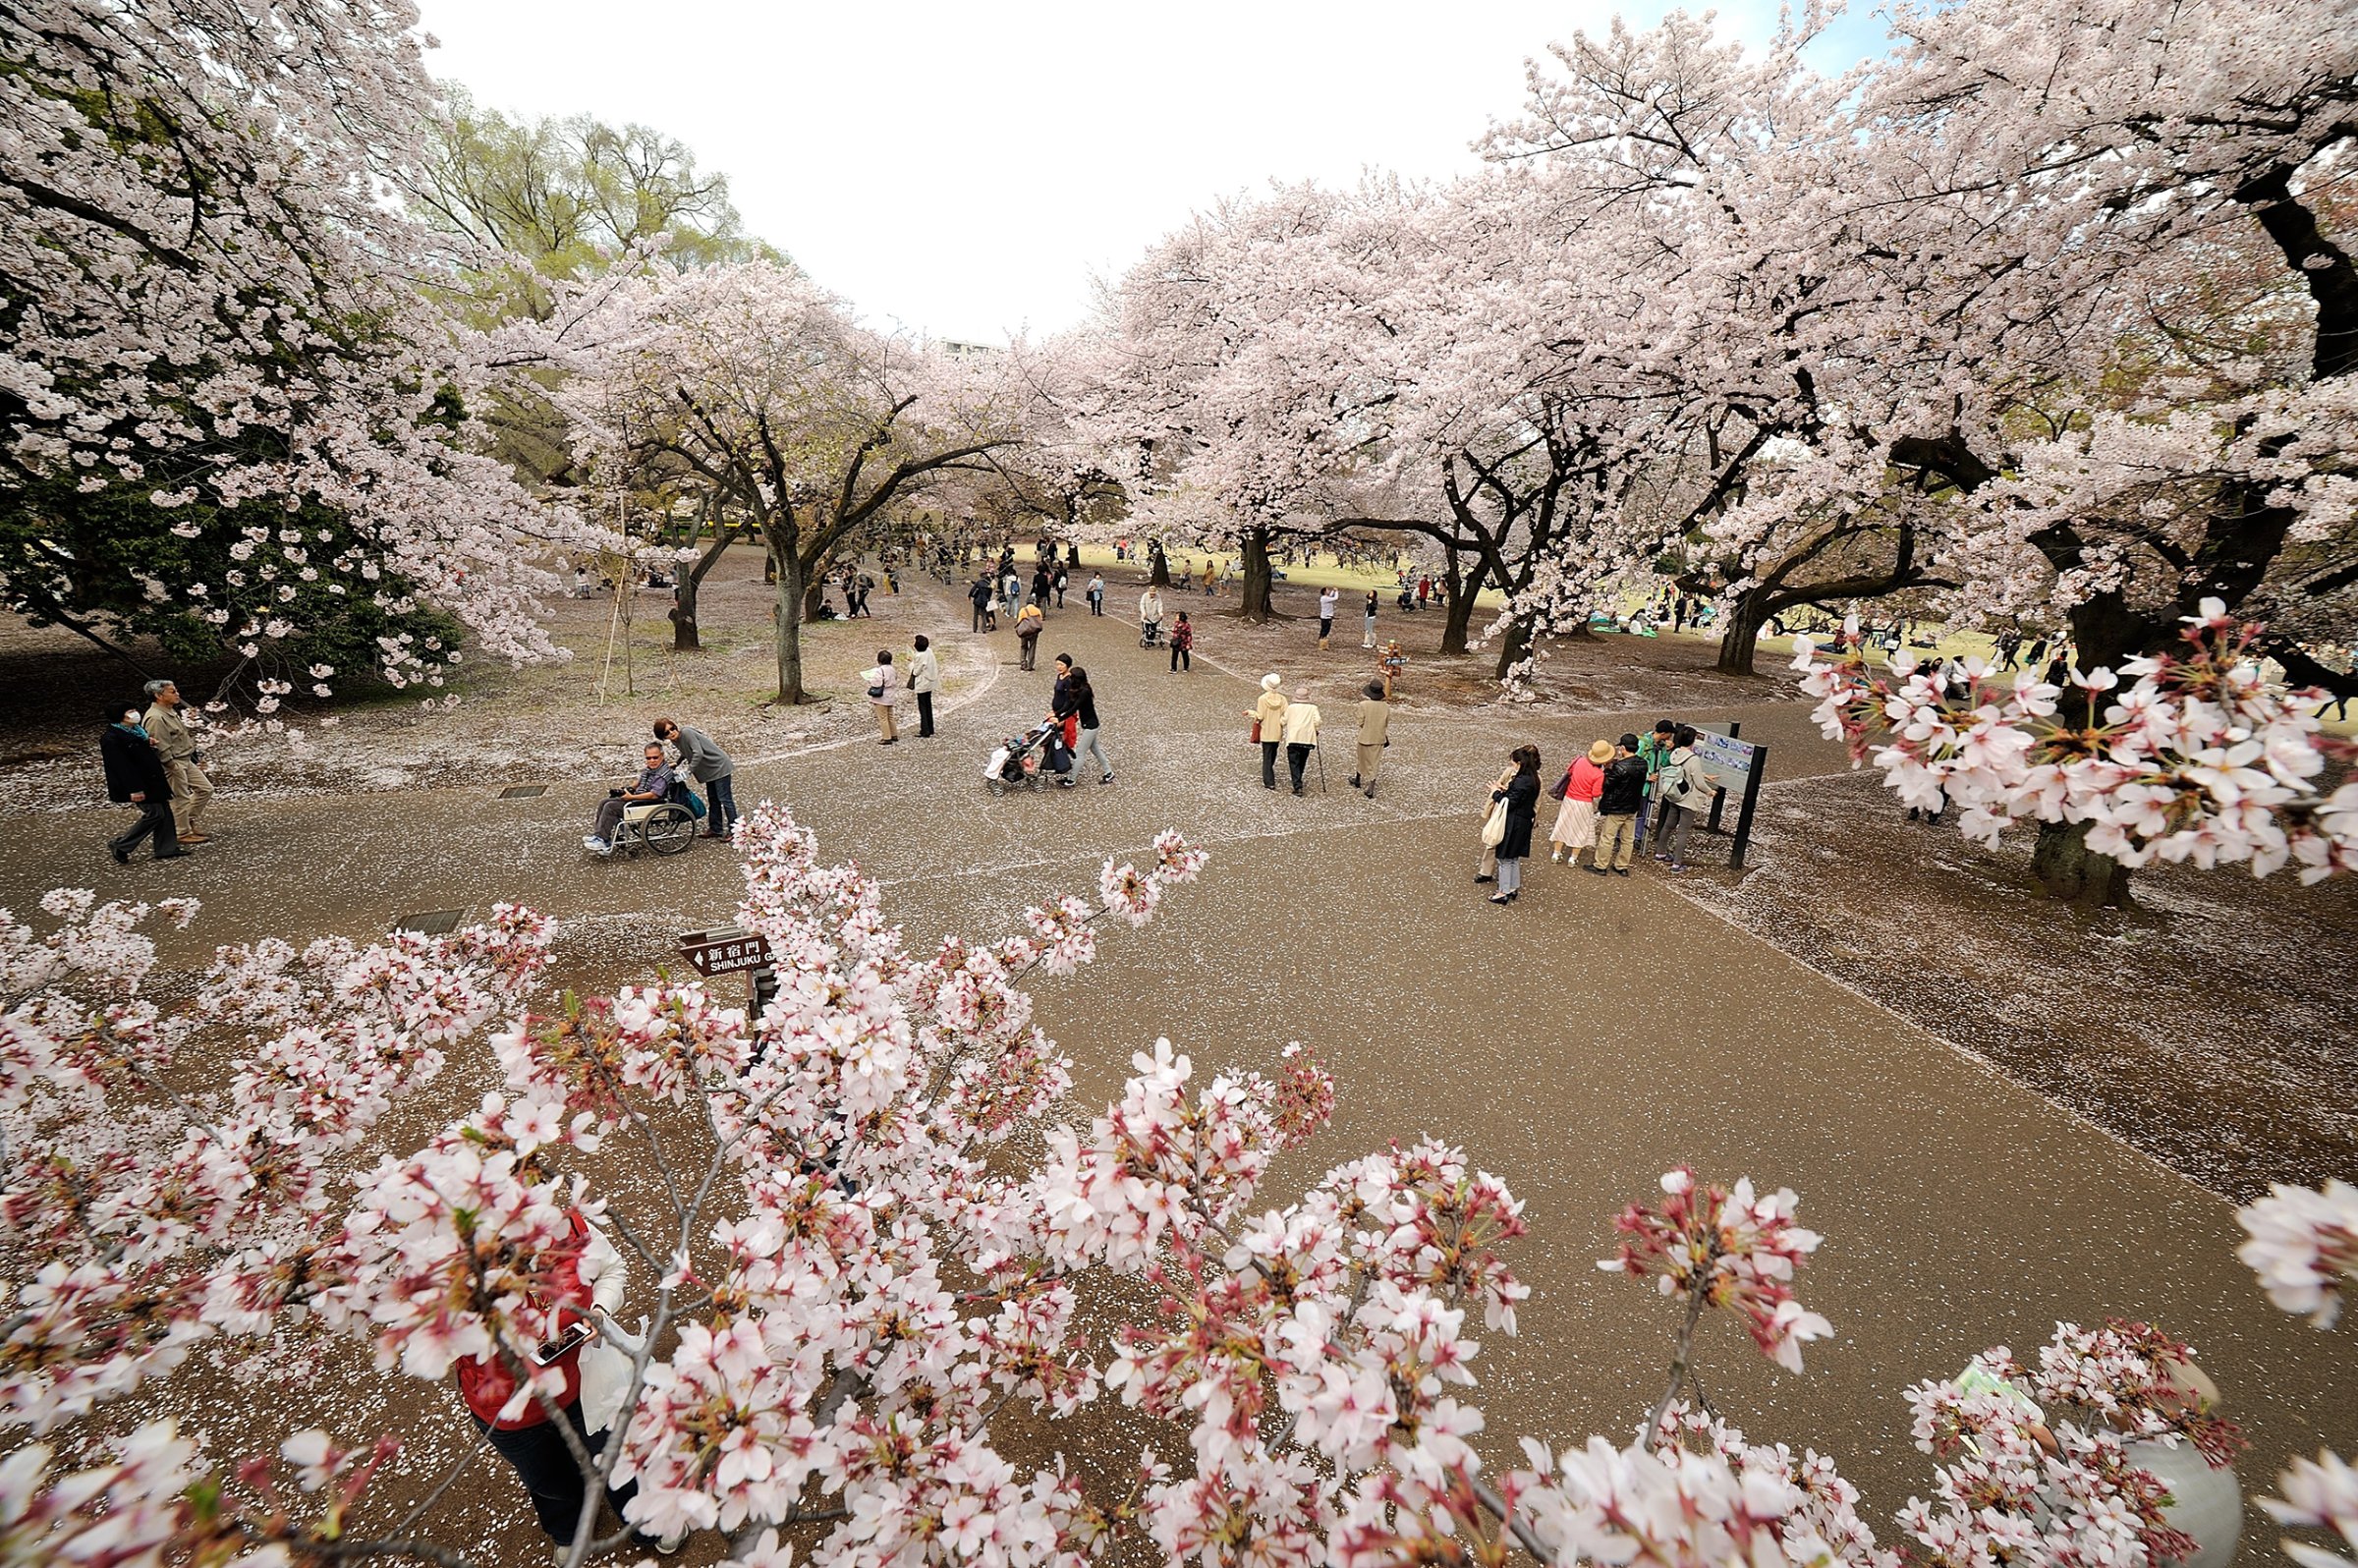 People enjoy the last day of Hanami, a traditional picnic between family, friends or colleague to enjoy the cherry blossoms in Tokyo's Shinjuku Park on April 6, 2016.